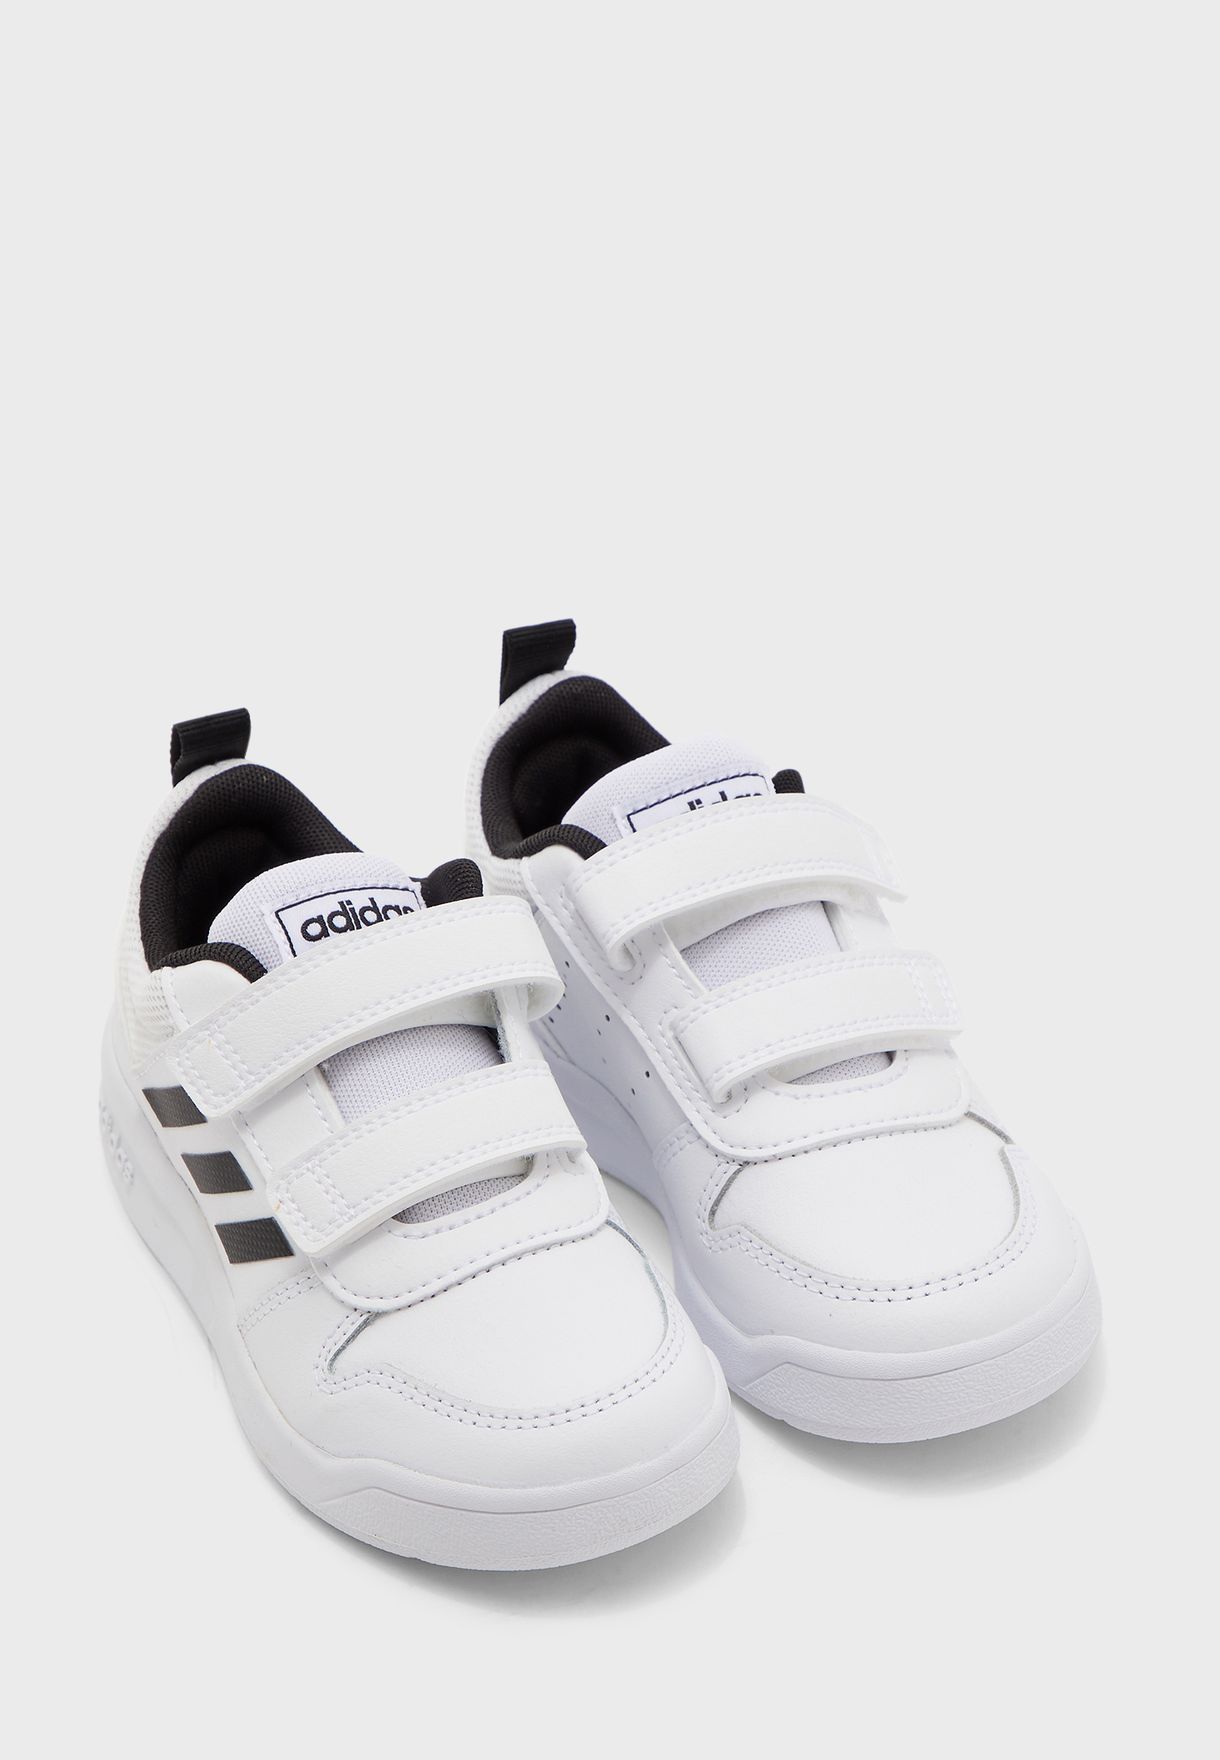 adidas 3 strap shoes